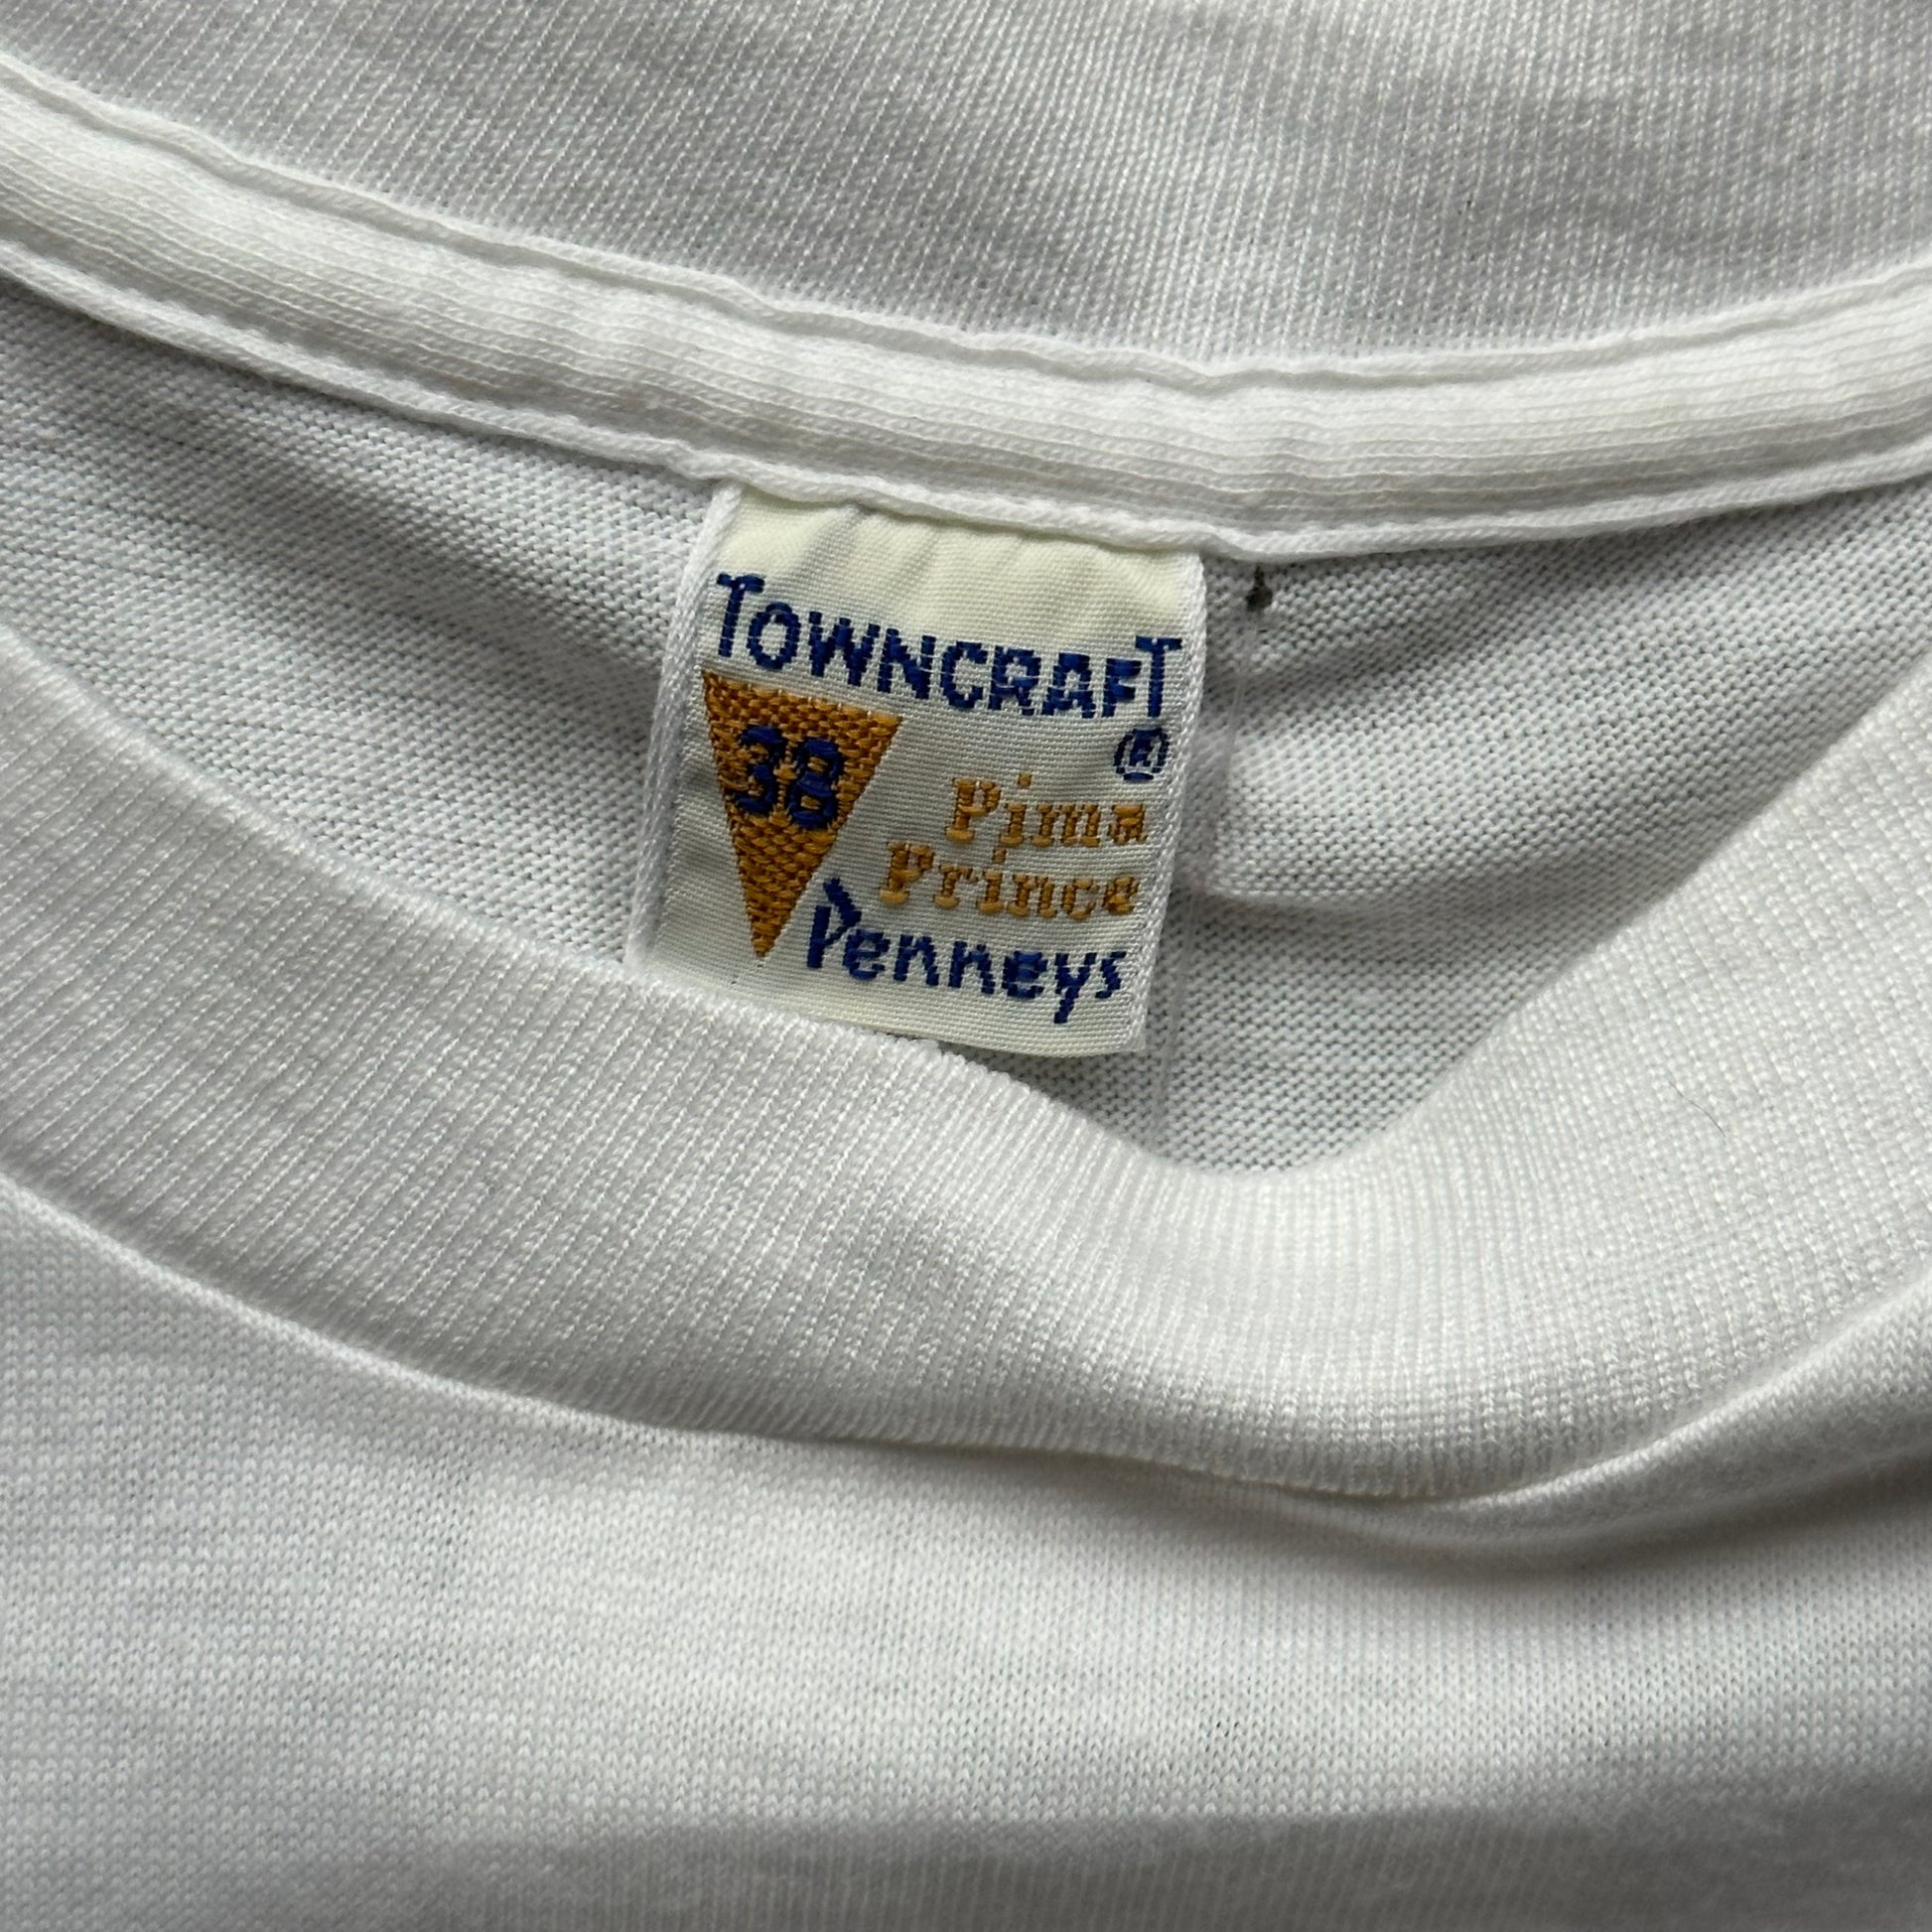 Tag View of Vintage Penneys Towncraft Pima Pride Blank Tee Shirt SZ 38 | Vintage Blank Tees Seattle | Vintage T-Shirts Seattle